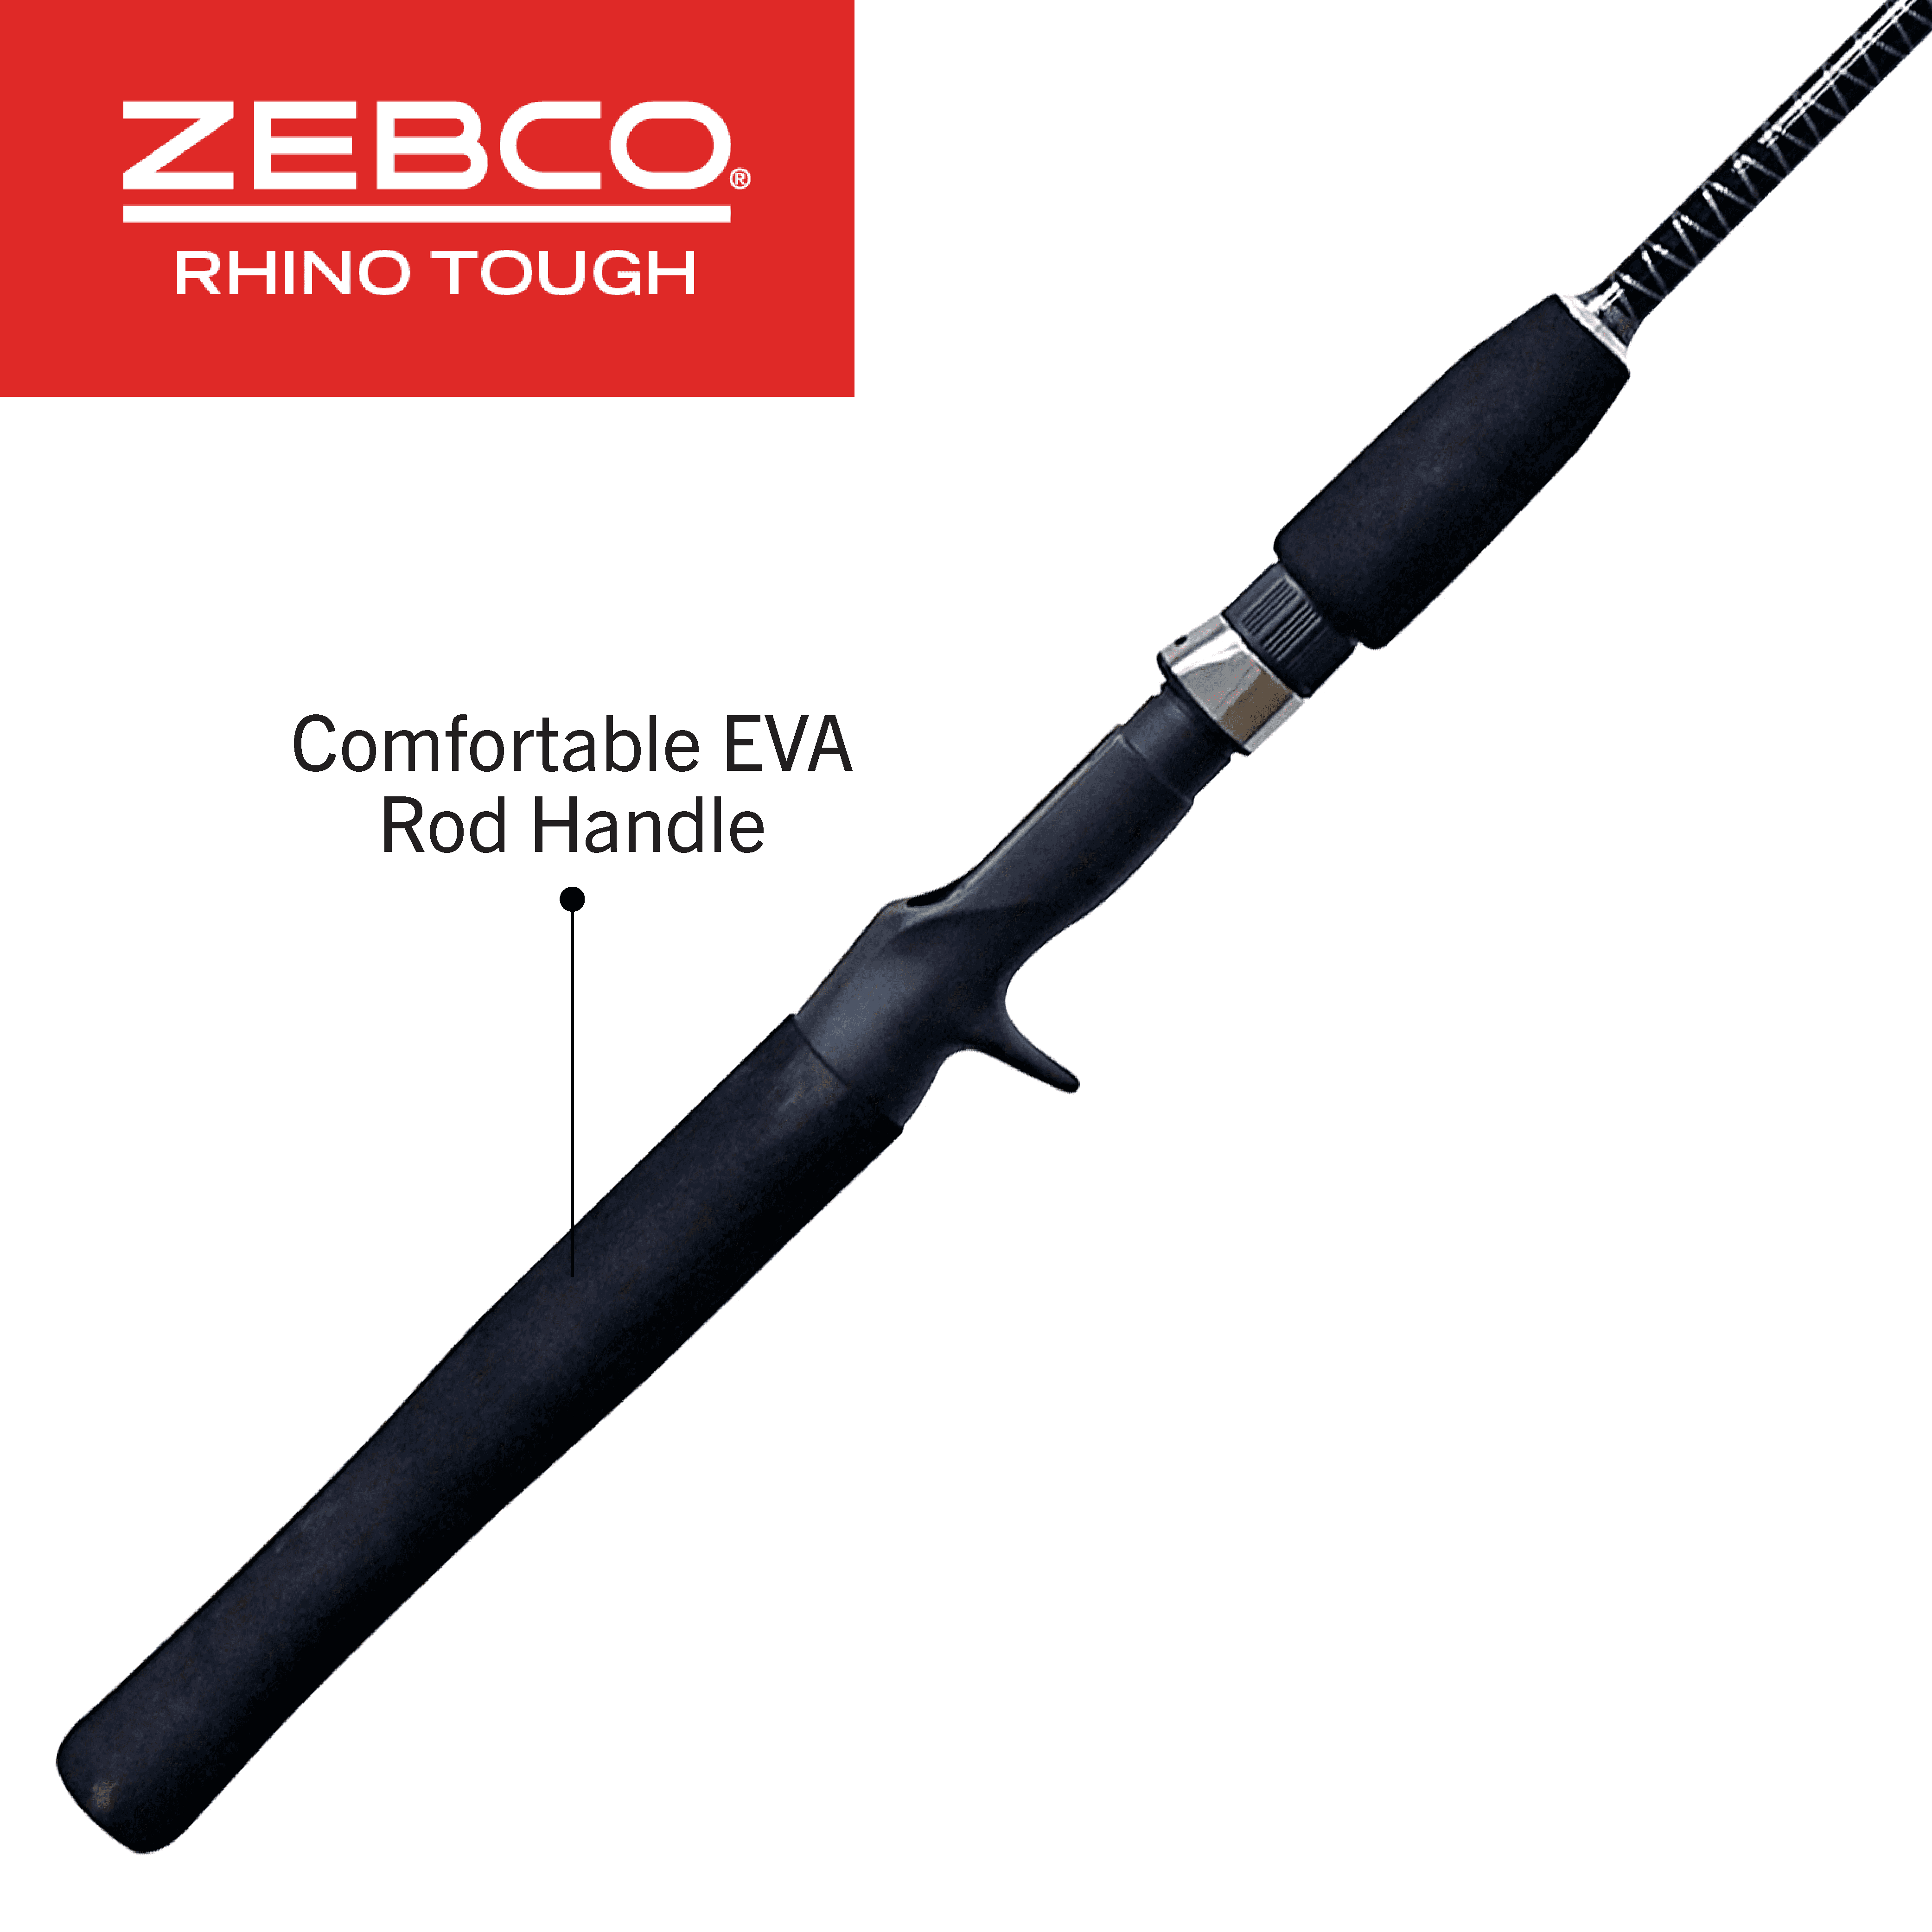  Zebco Rhino Tough Casting Fishing Rod, 5-Foot 6-Inch 1-Piece  Heavy-Duty Cross-Weave Fishing Pole, Comfortable EVA Rod Handle, Heavy-Duty  Guides, Stainless Steel D-Frame Tip Guide, Medium Power, Black : Everything  Else